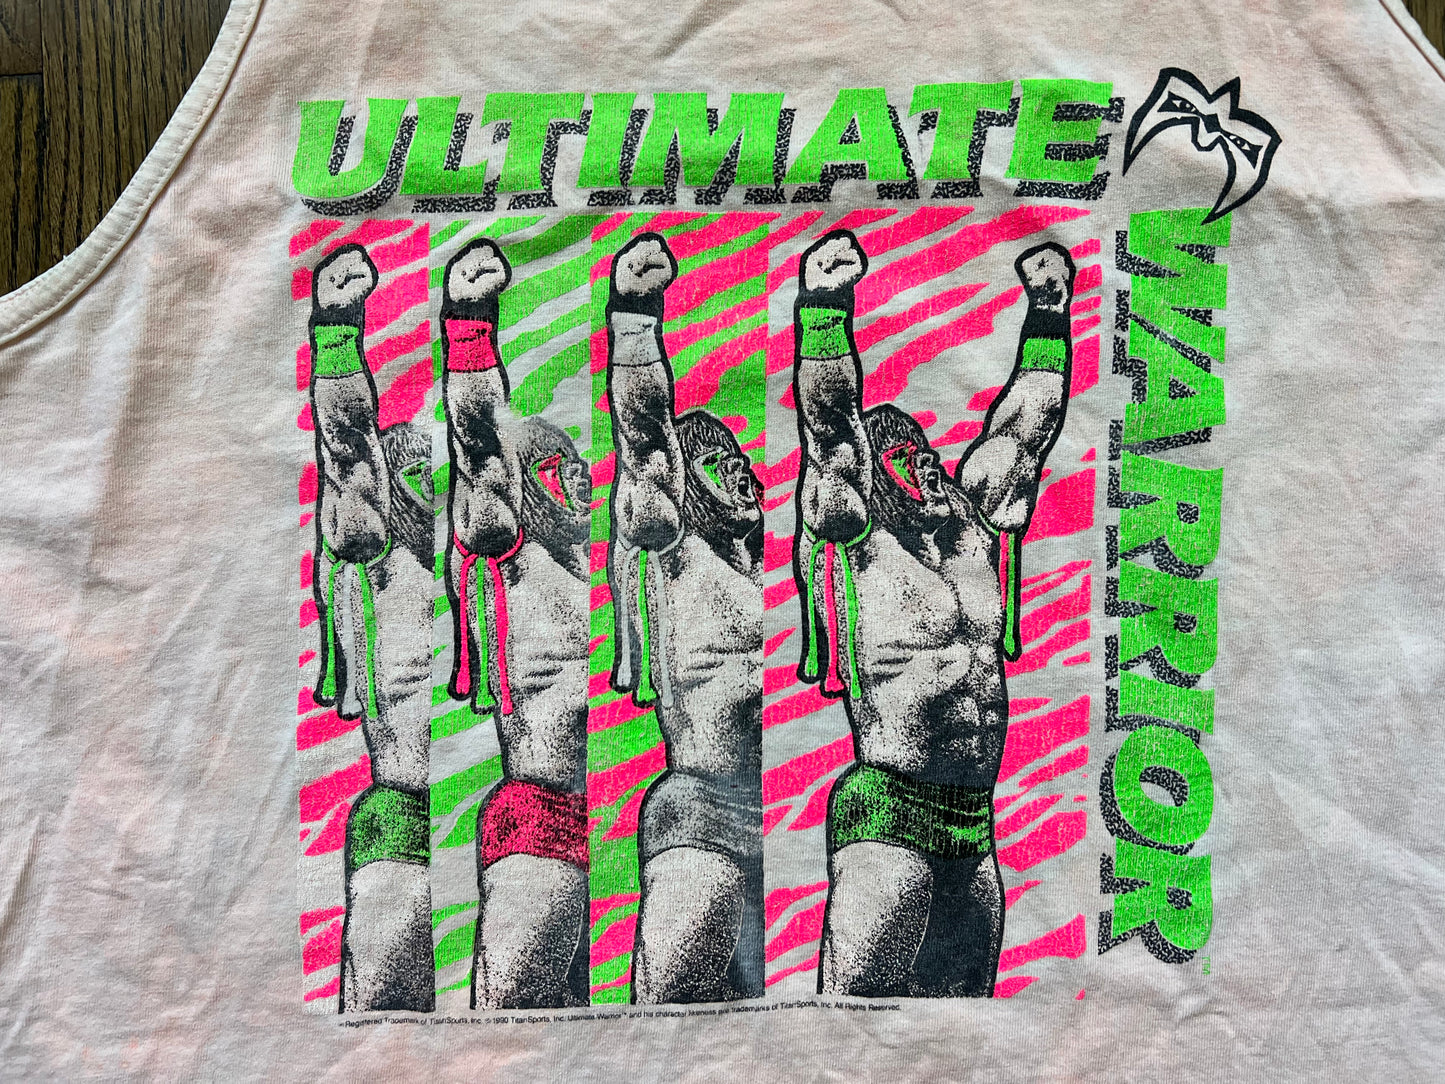 1990 WWF Ultimate Warrior Tank Top
 
The